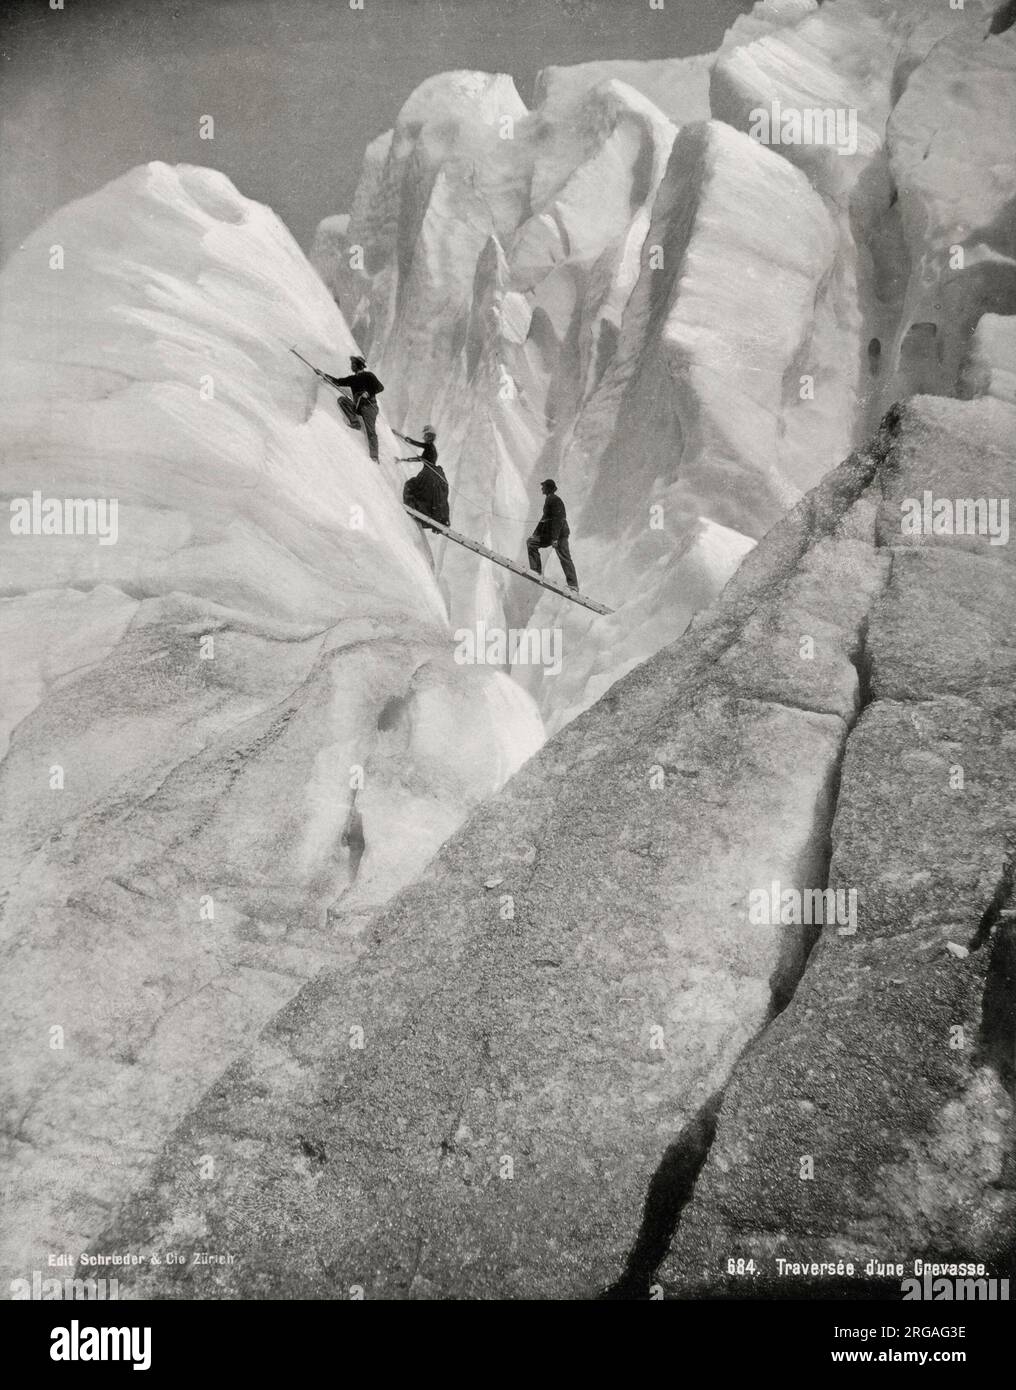 Vintage 19th century photograph - traversing a crevasse, climbers in the  Alps. Stock Photo